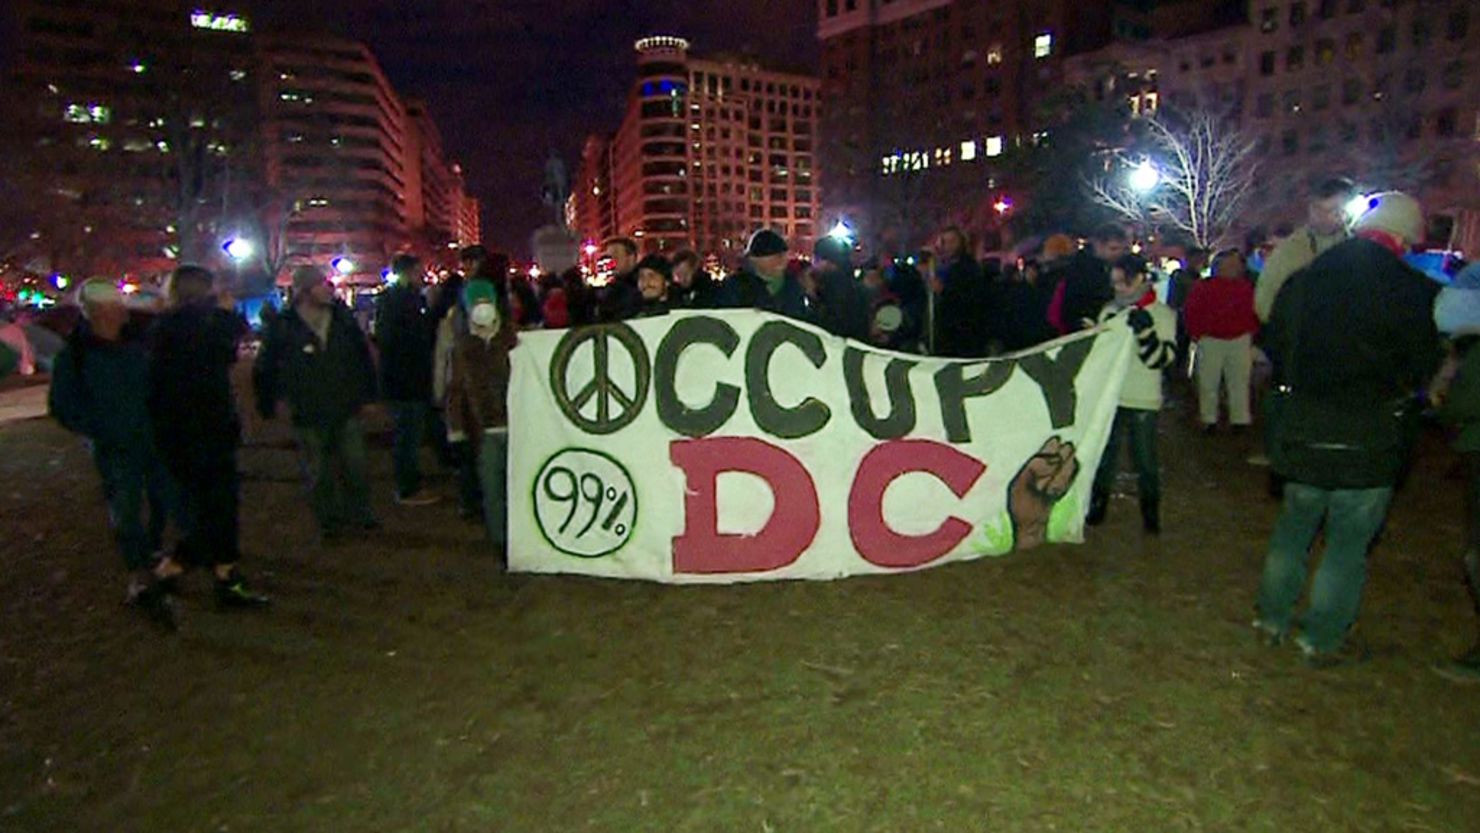 Occupy DC protesters are part of a movement that is having an impact  on the GOP race, says Dean Obeidallah.